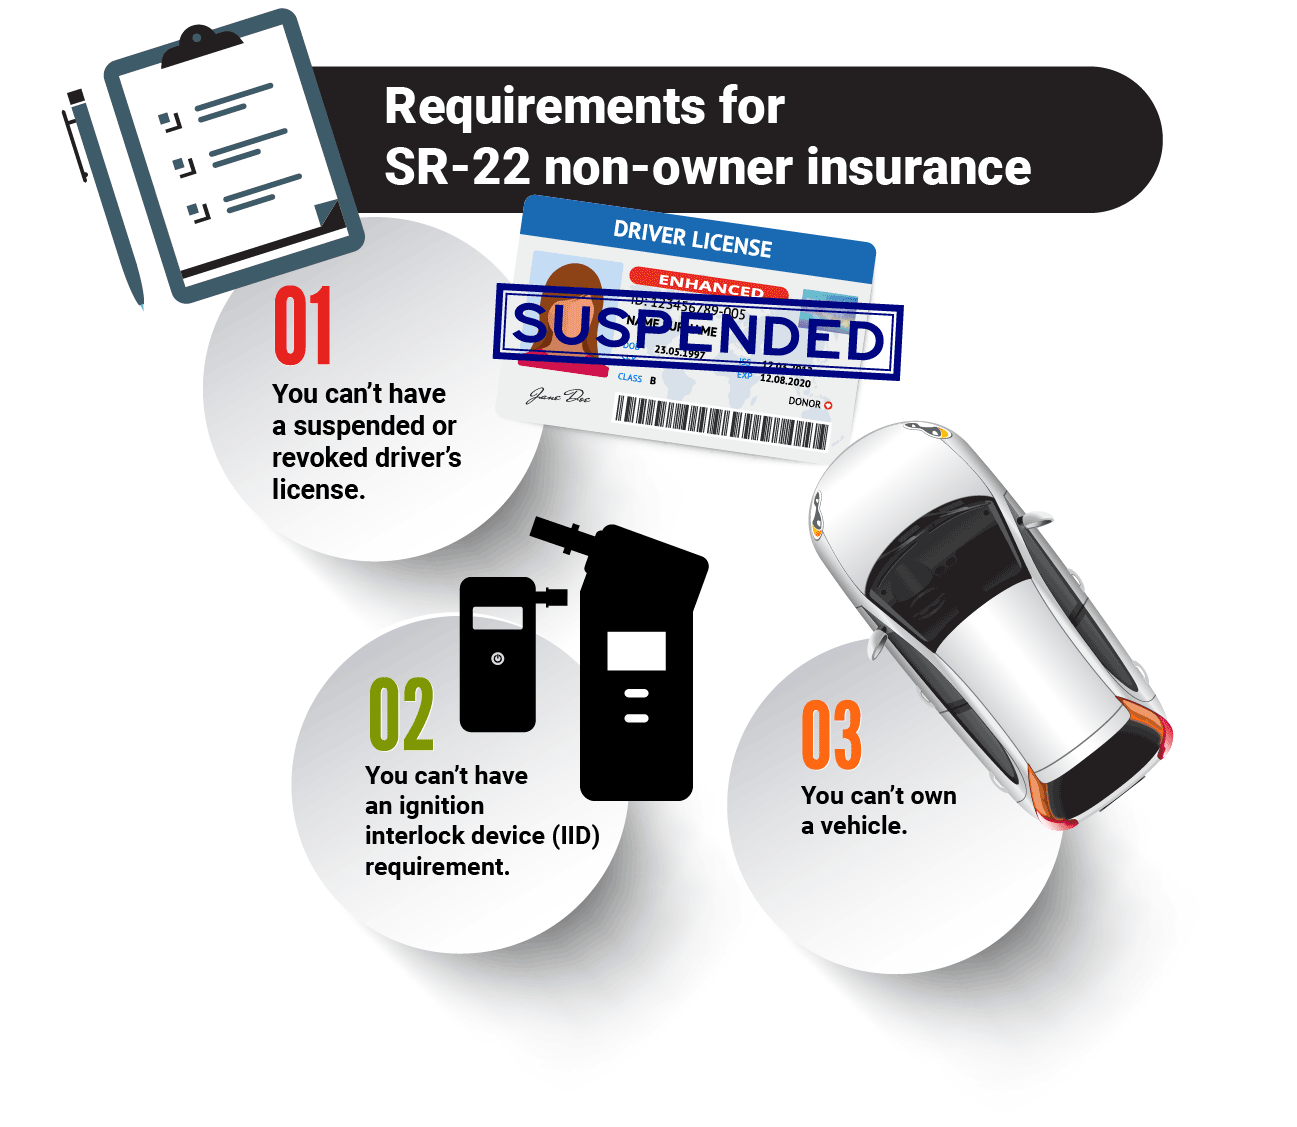 Requirements for SR-11 non-owner car insurance